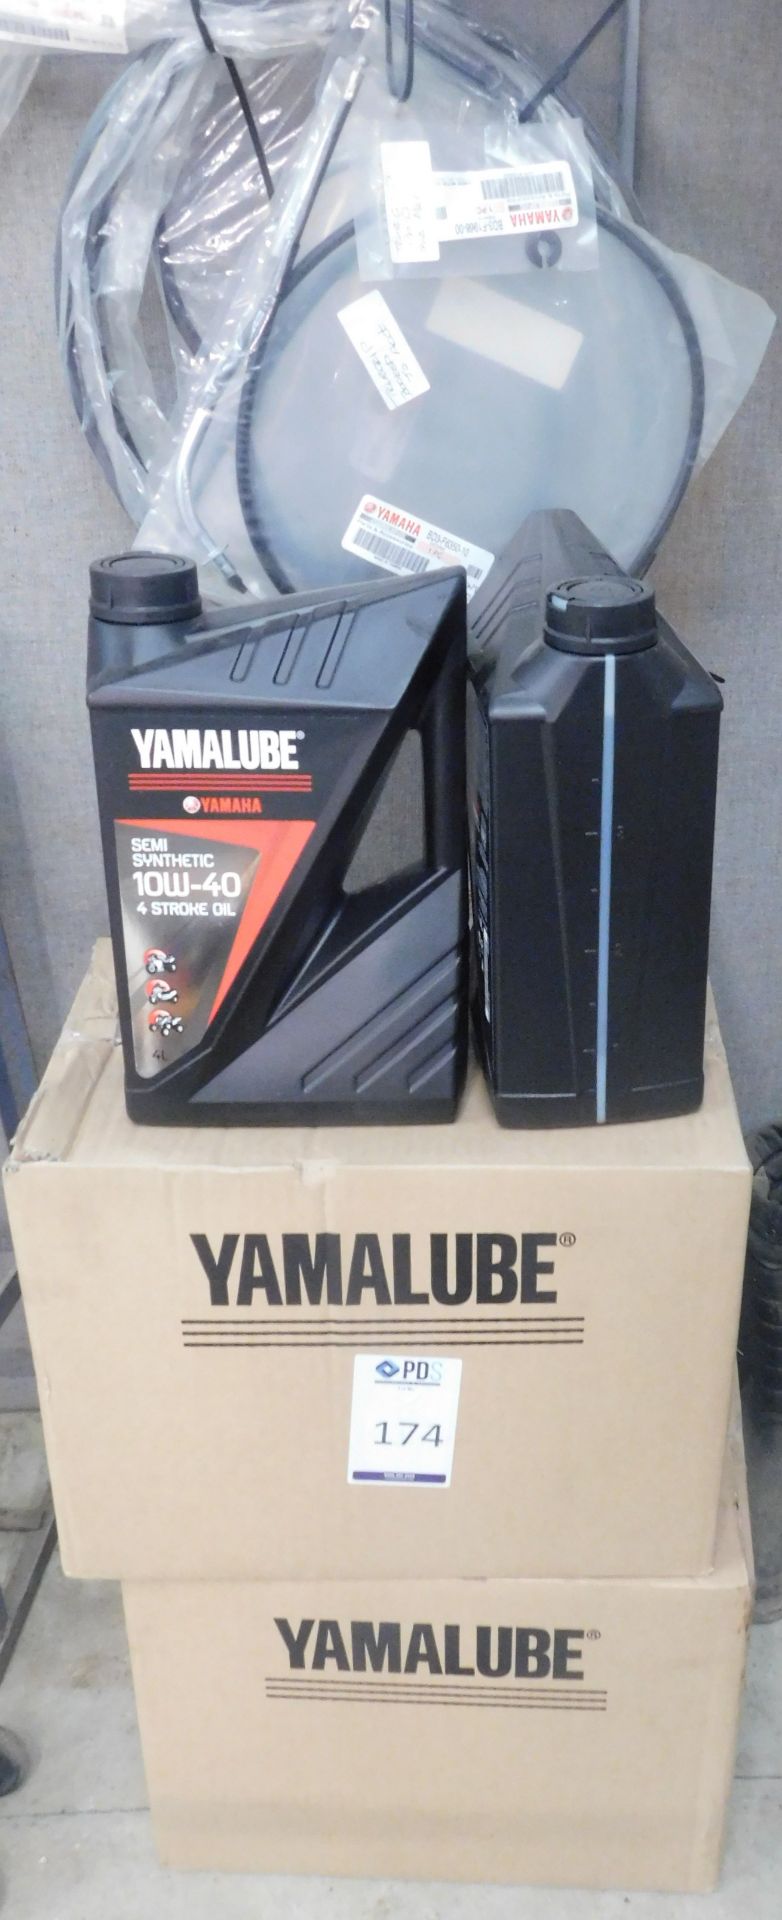 Yamalube 4 Stroke Oil, Gearbox Oil, Yamaha Parts & Accessories (Location Ashford, Kent. Please Refer